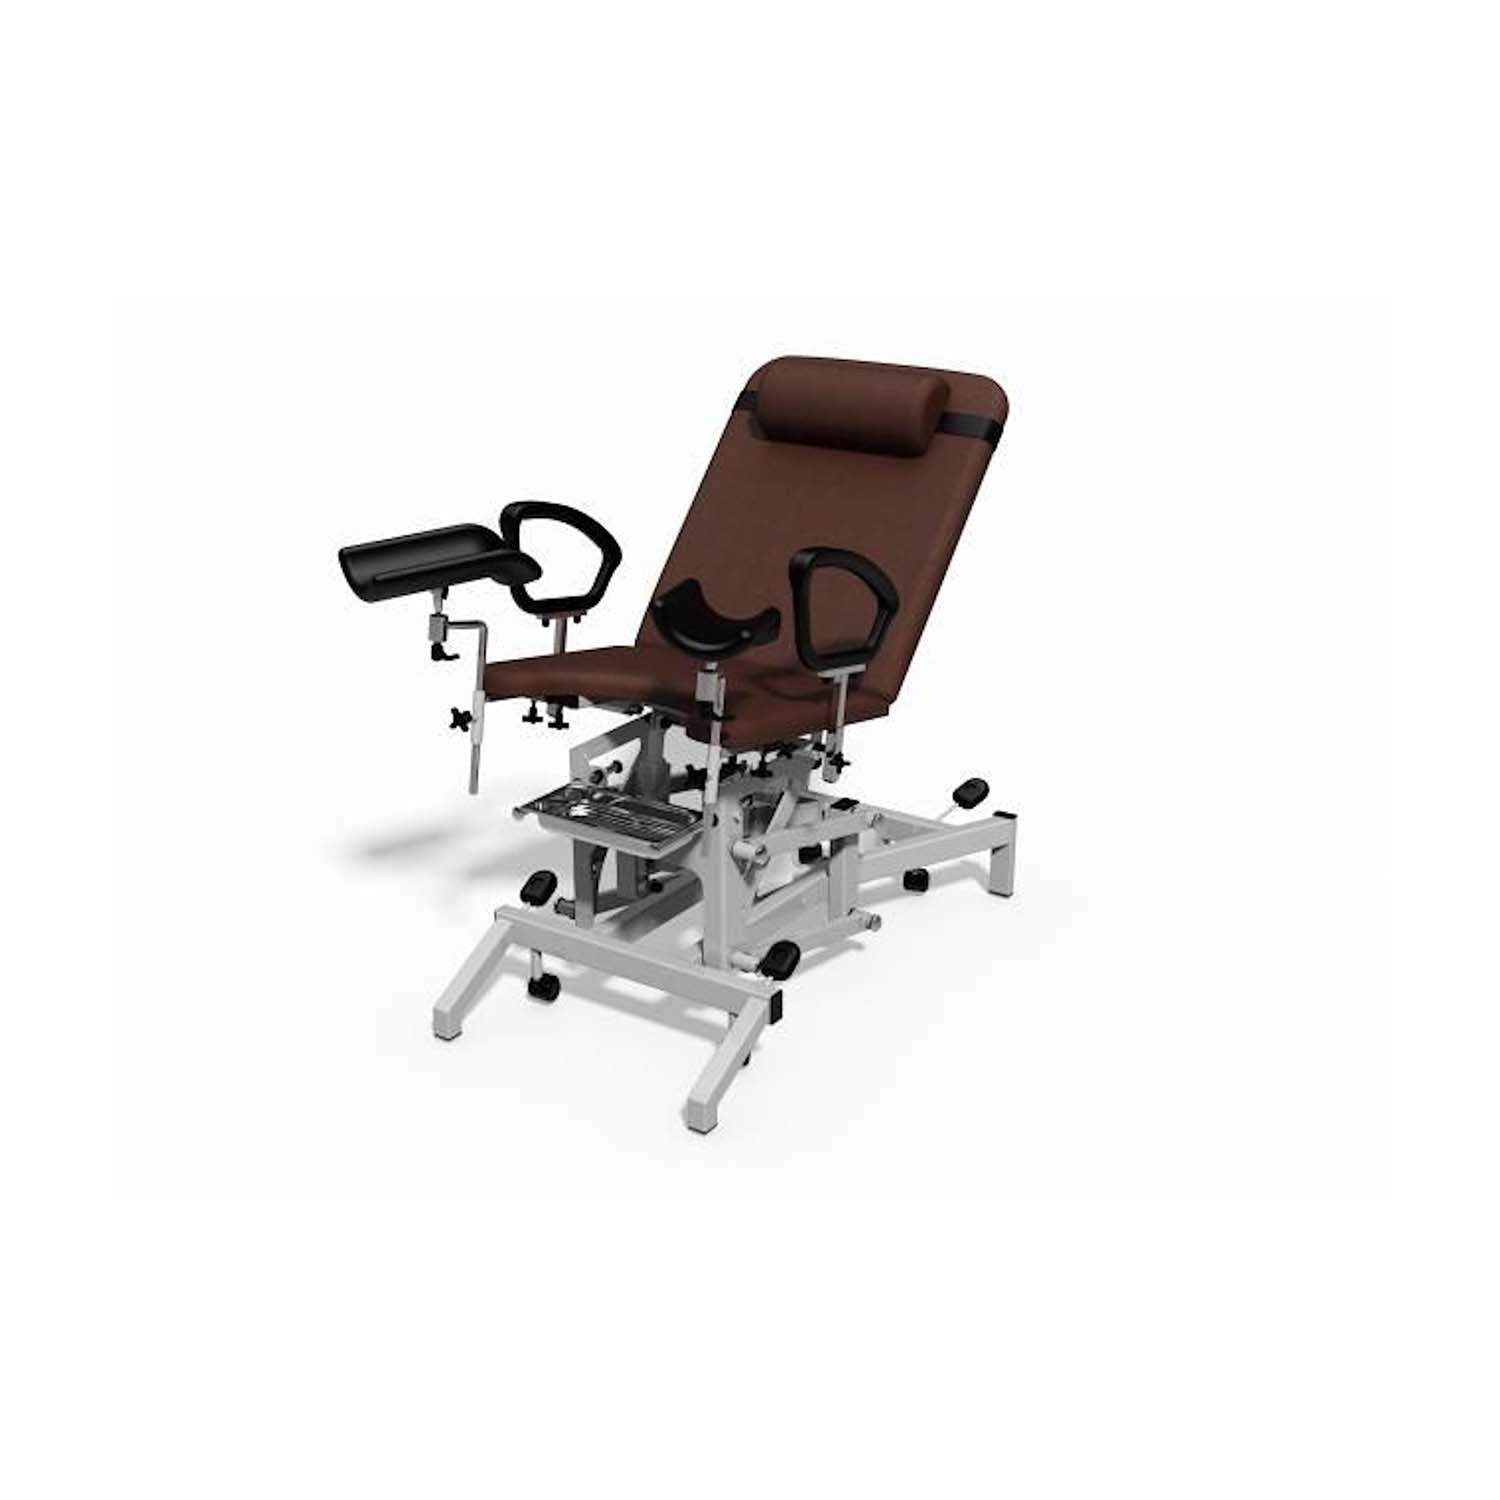 Plinth 2000 Model 93G Gynaecology Chair 3 Motor | Cocoa